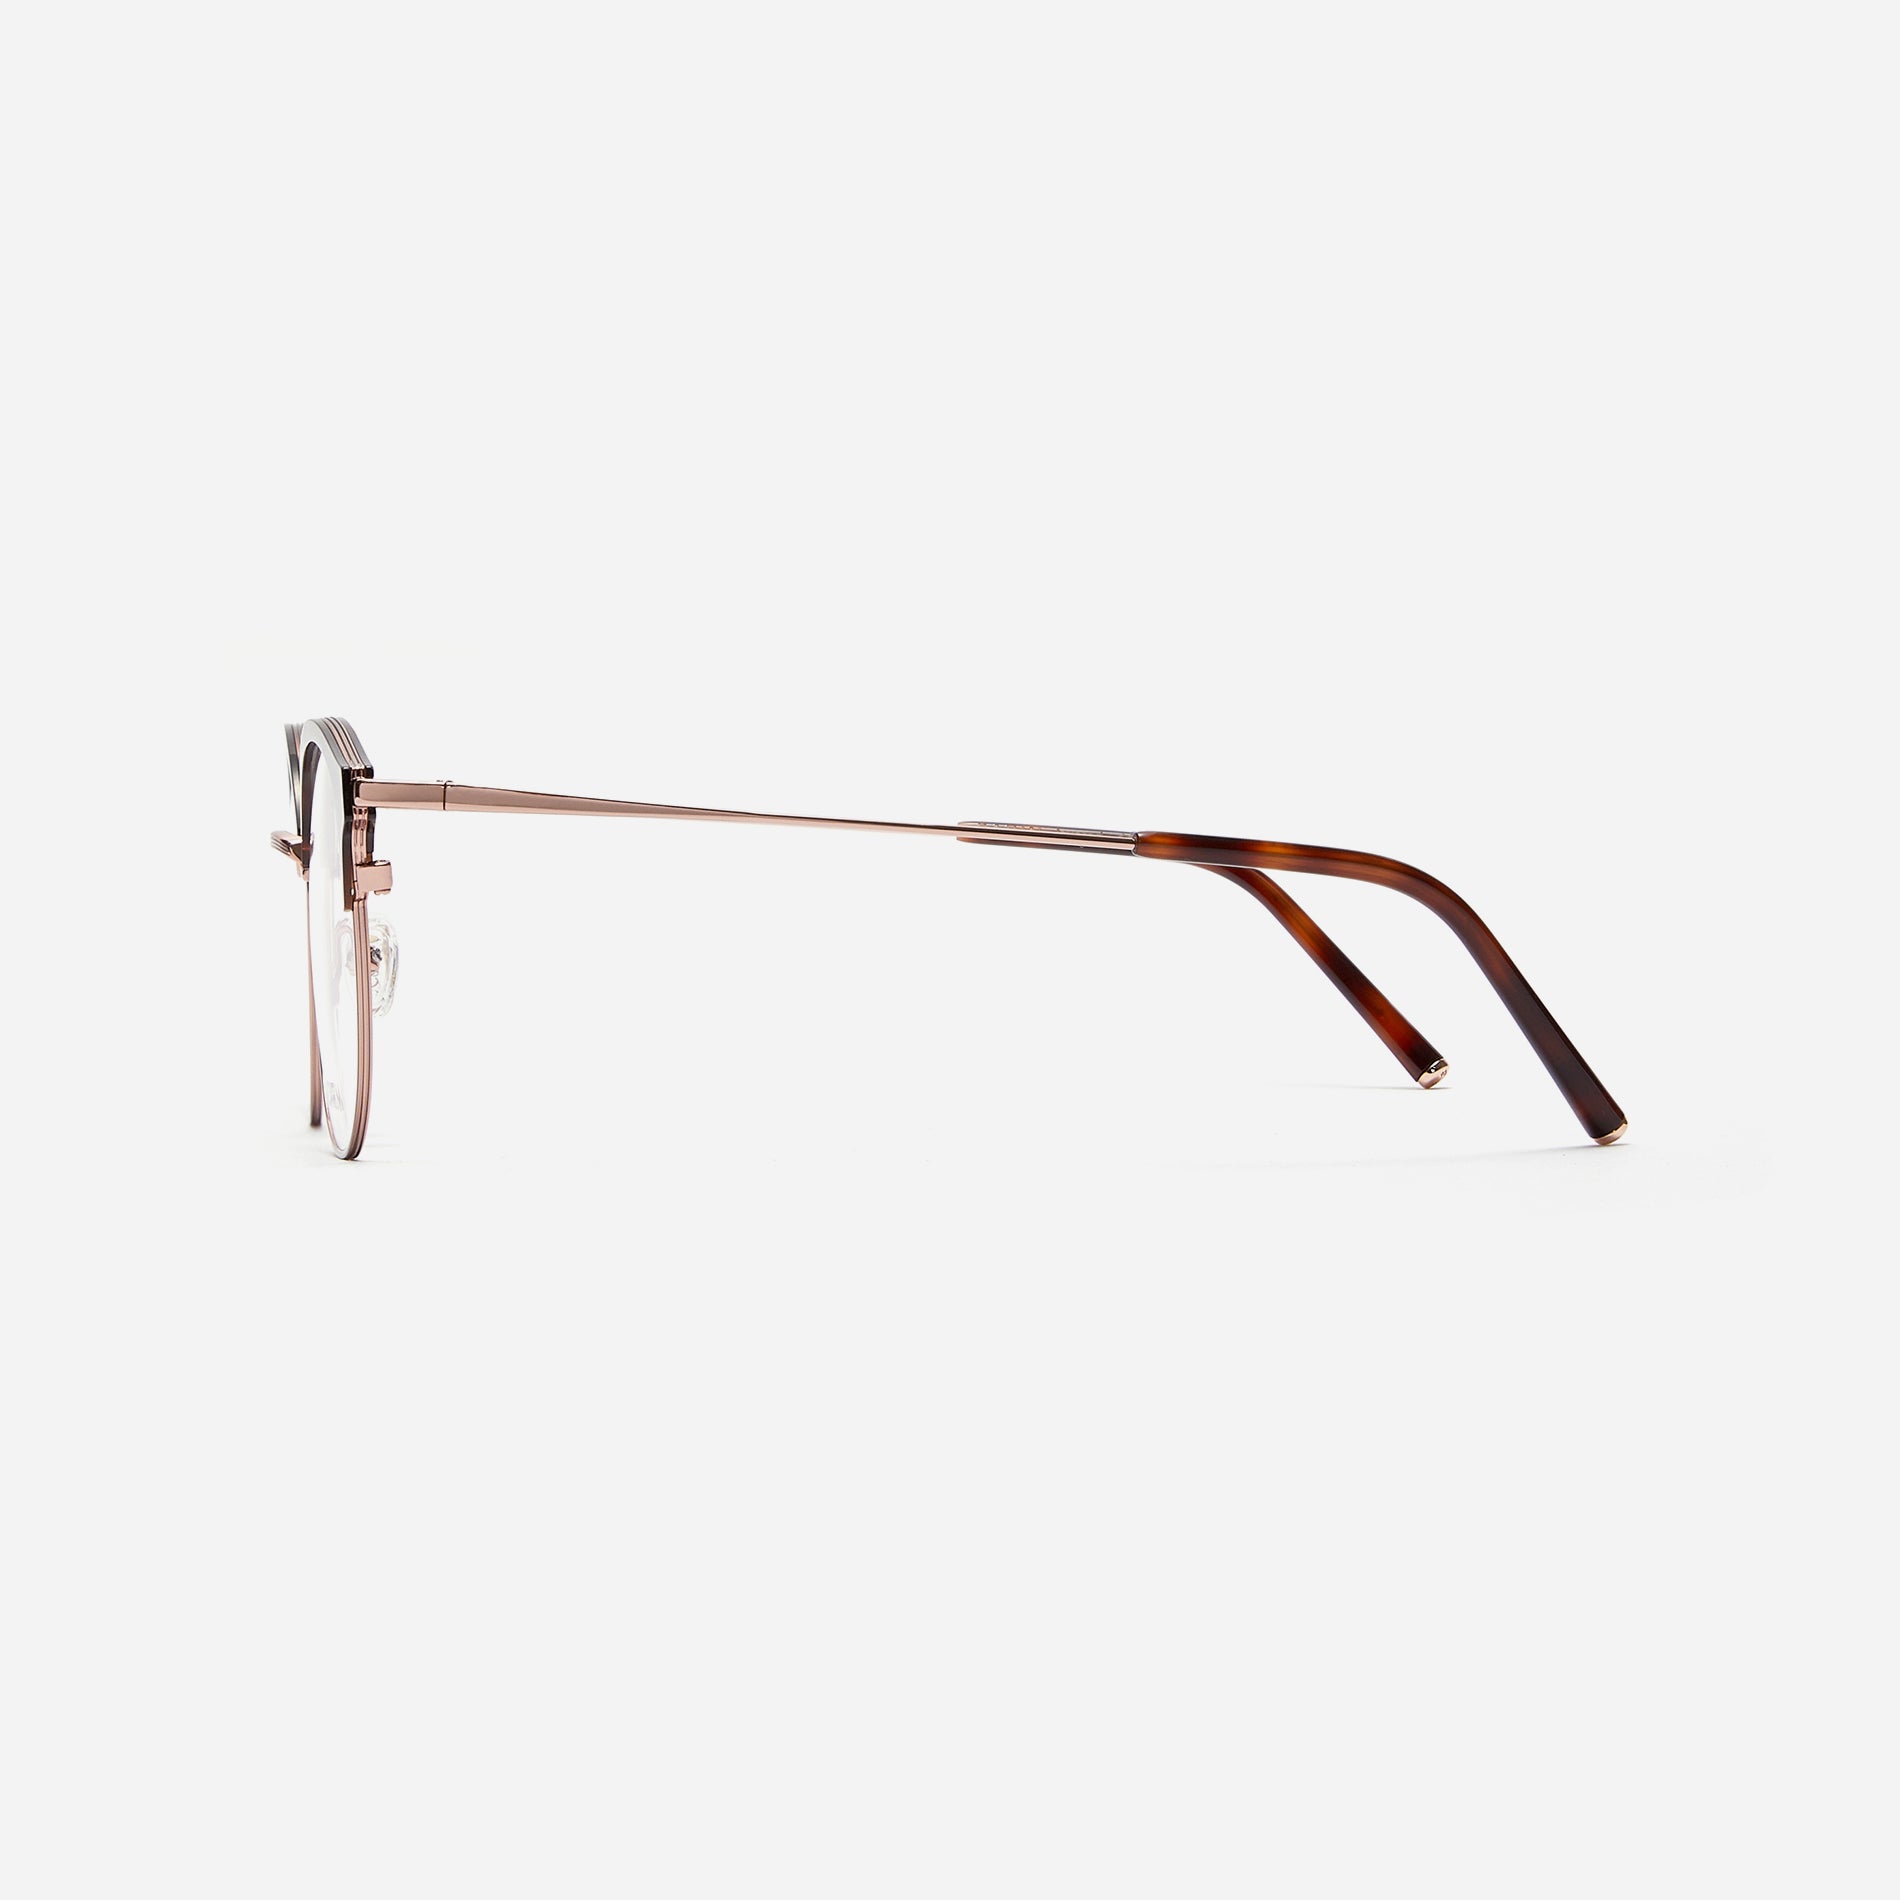 Oversized, square-shaped eyeglasses with a semi-rimless structure ideal for trendy styling and versatile wear.